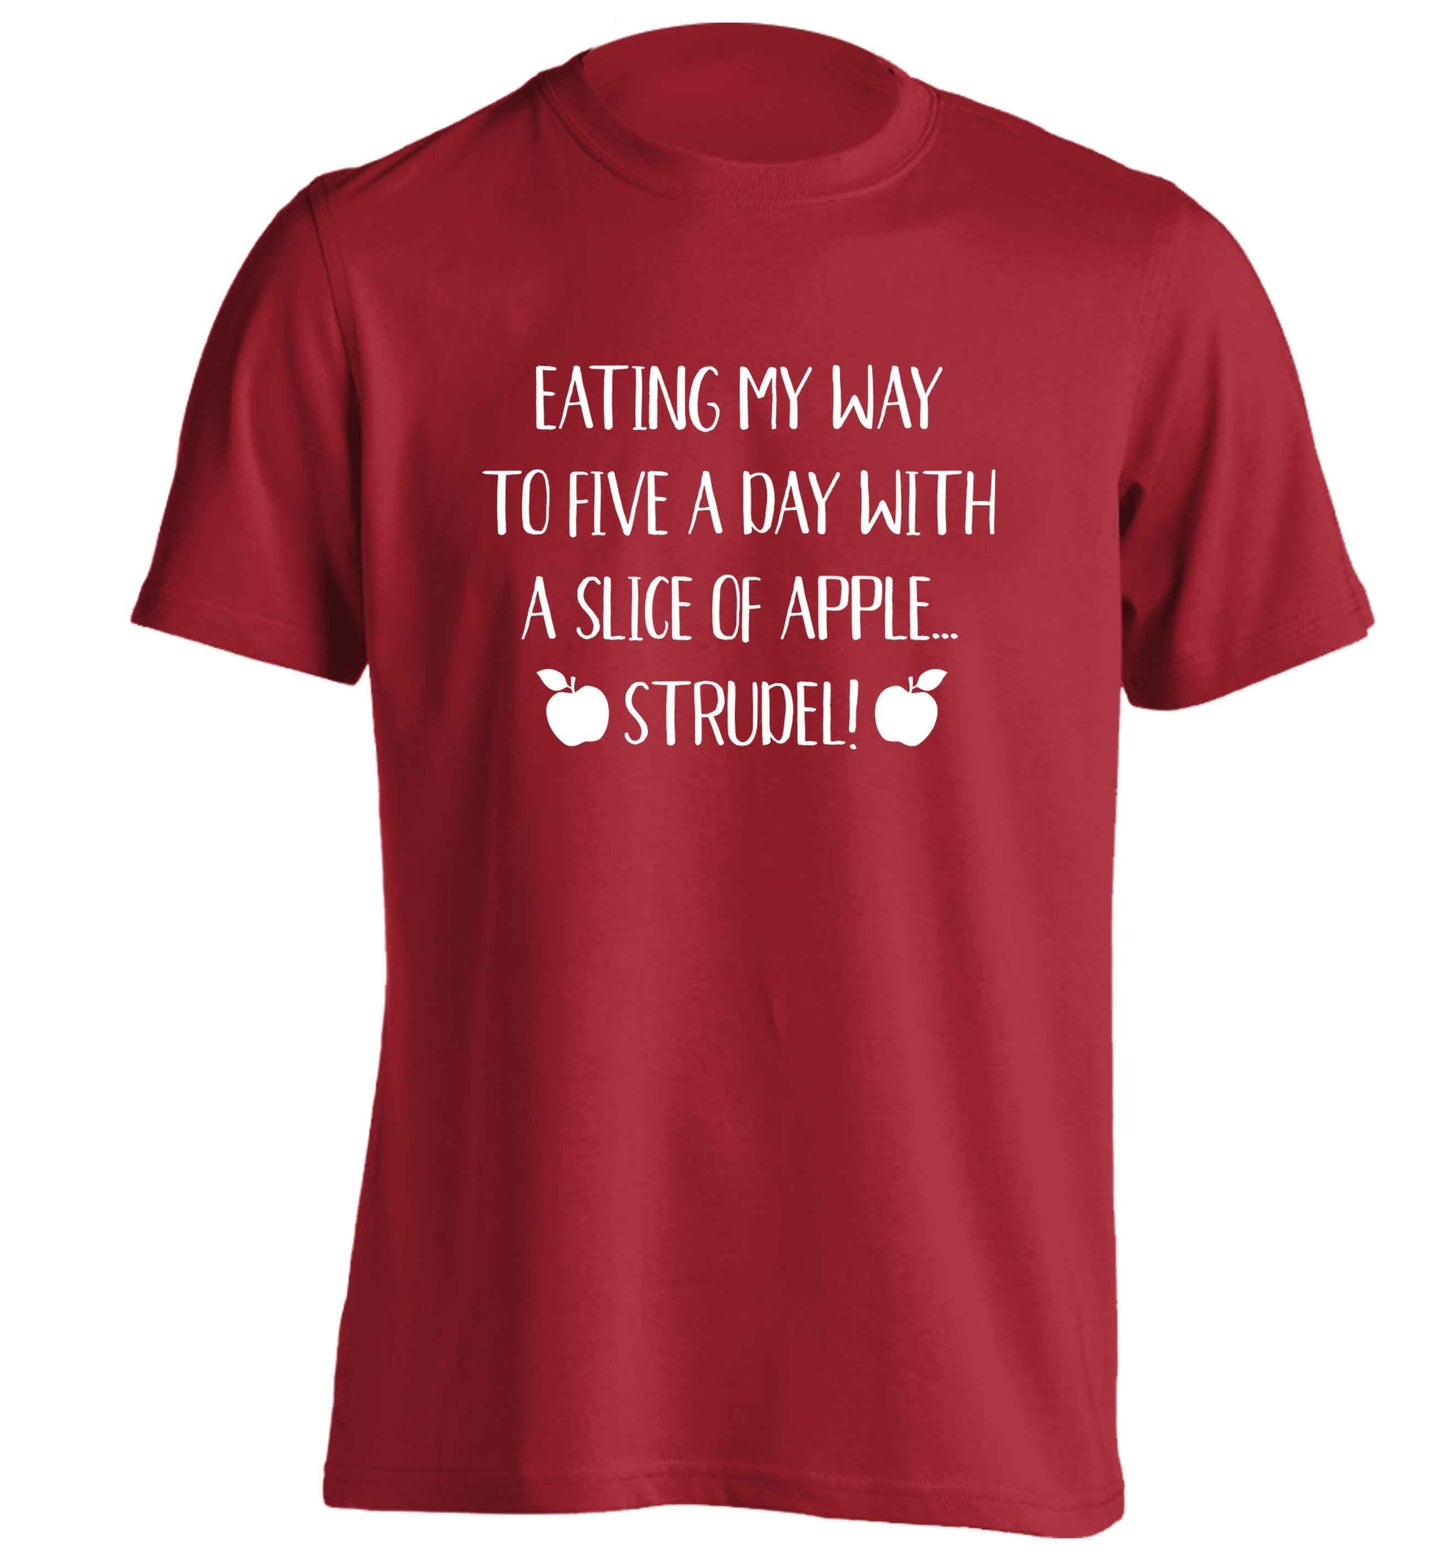 Eating my way to five a day with a slice of apple strudel adults unisex red Tshirt 2XL